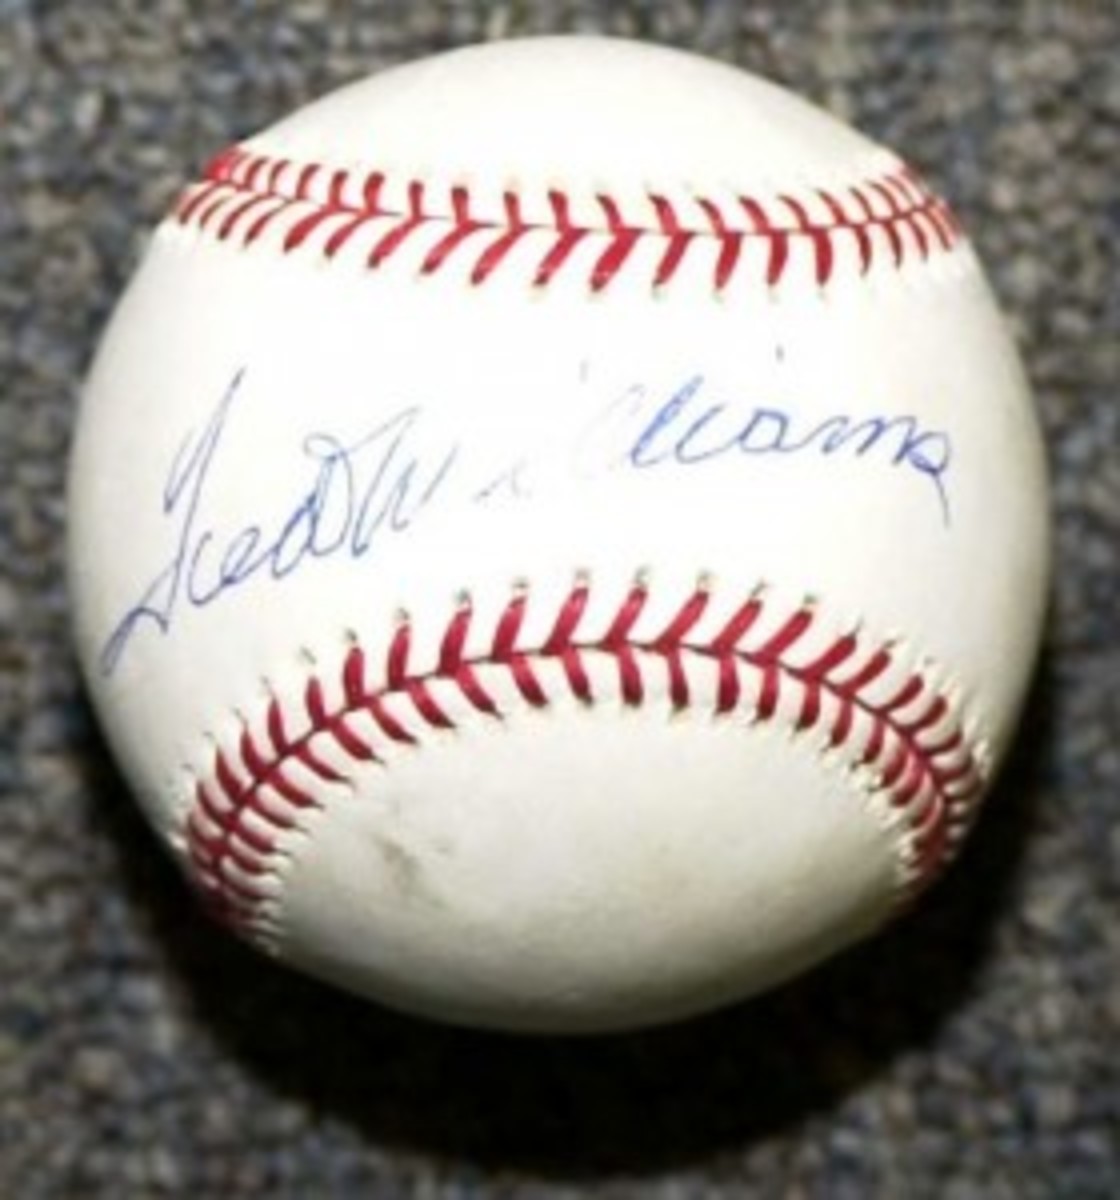 This Ted Williams ball was signed on the sweet spot – and it’s fake.